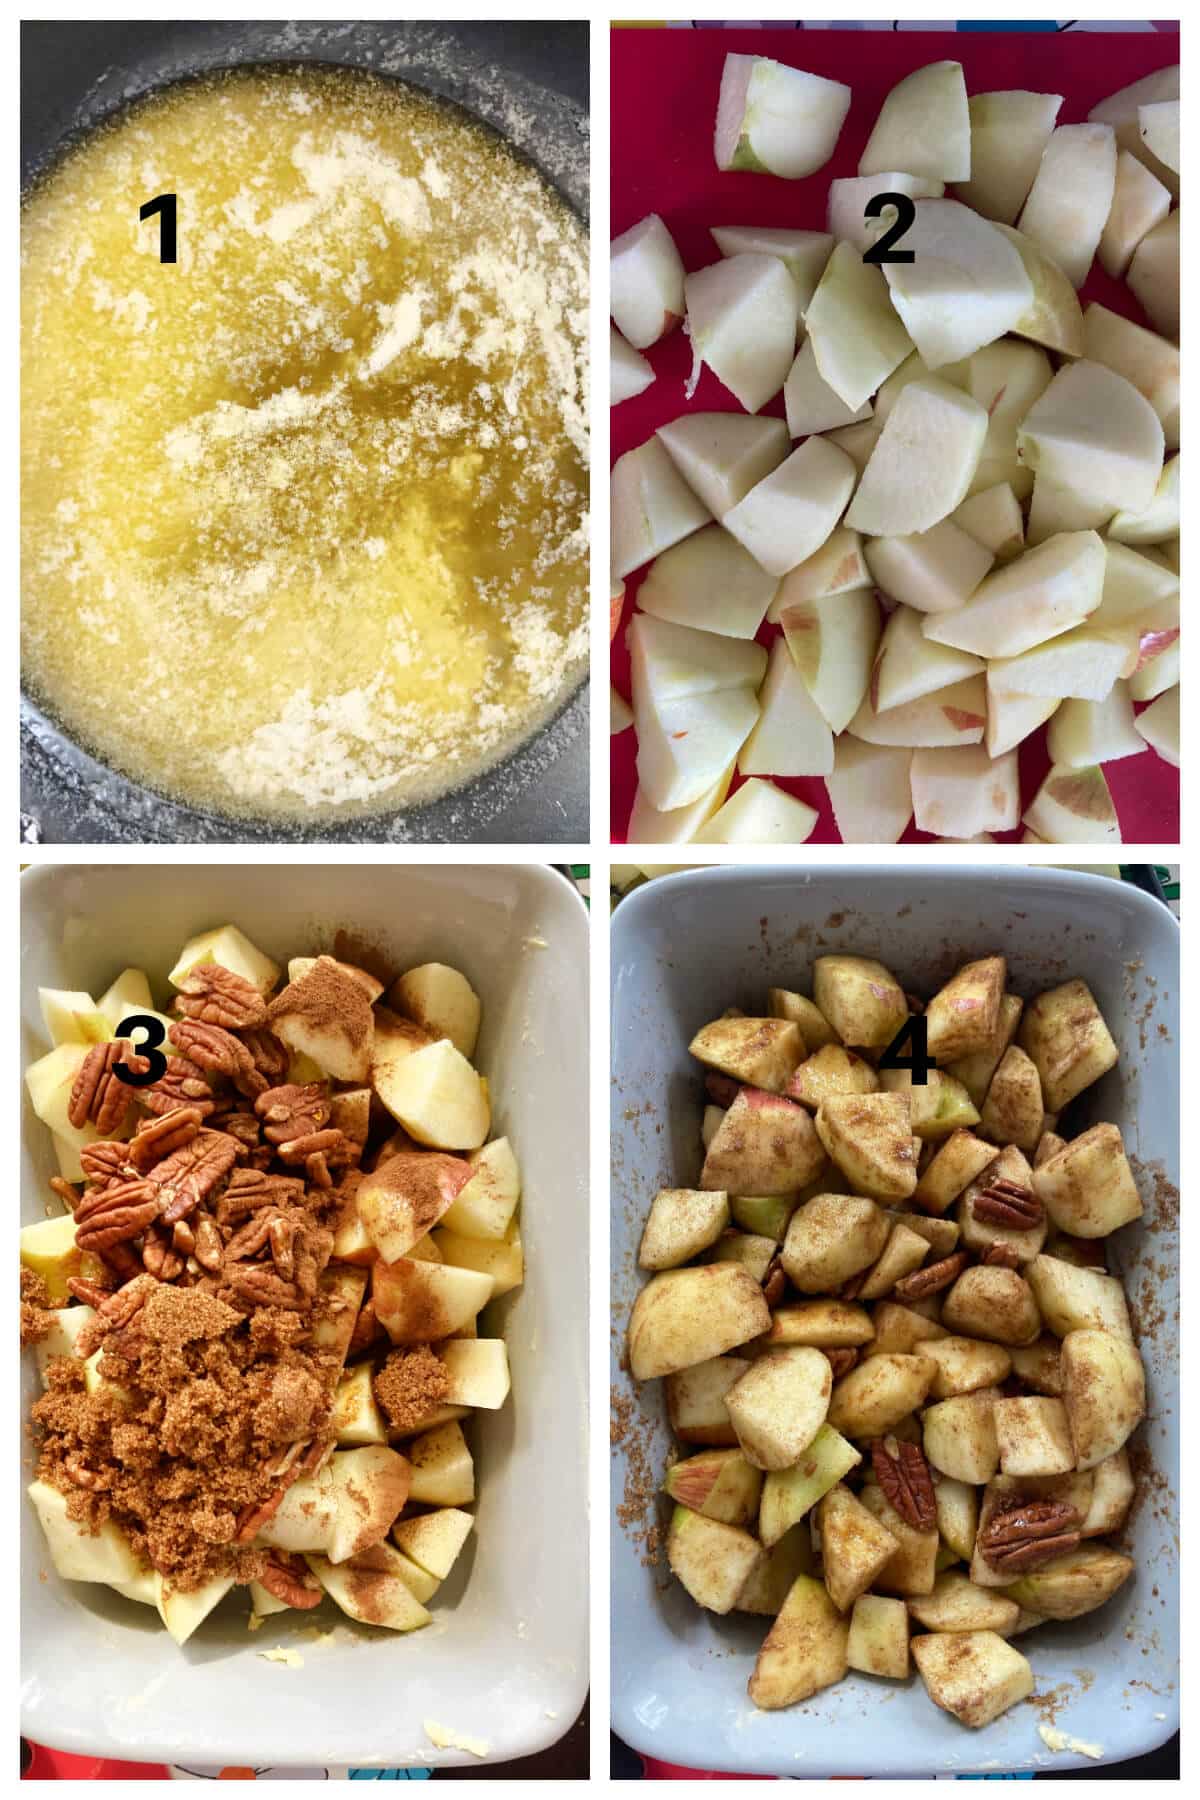 Collage of 4 photos to show how to make the crumble filling